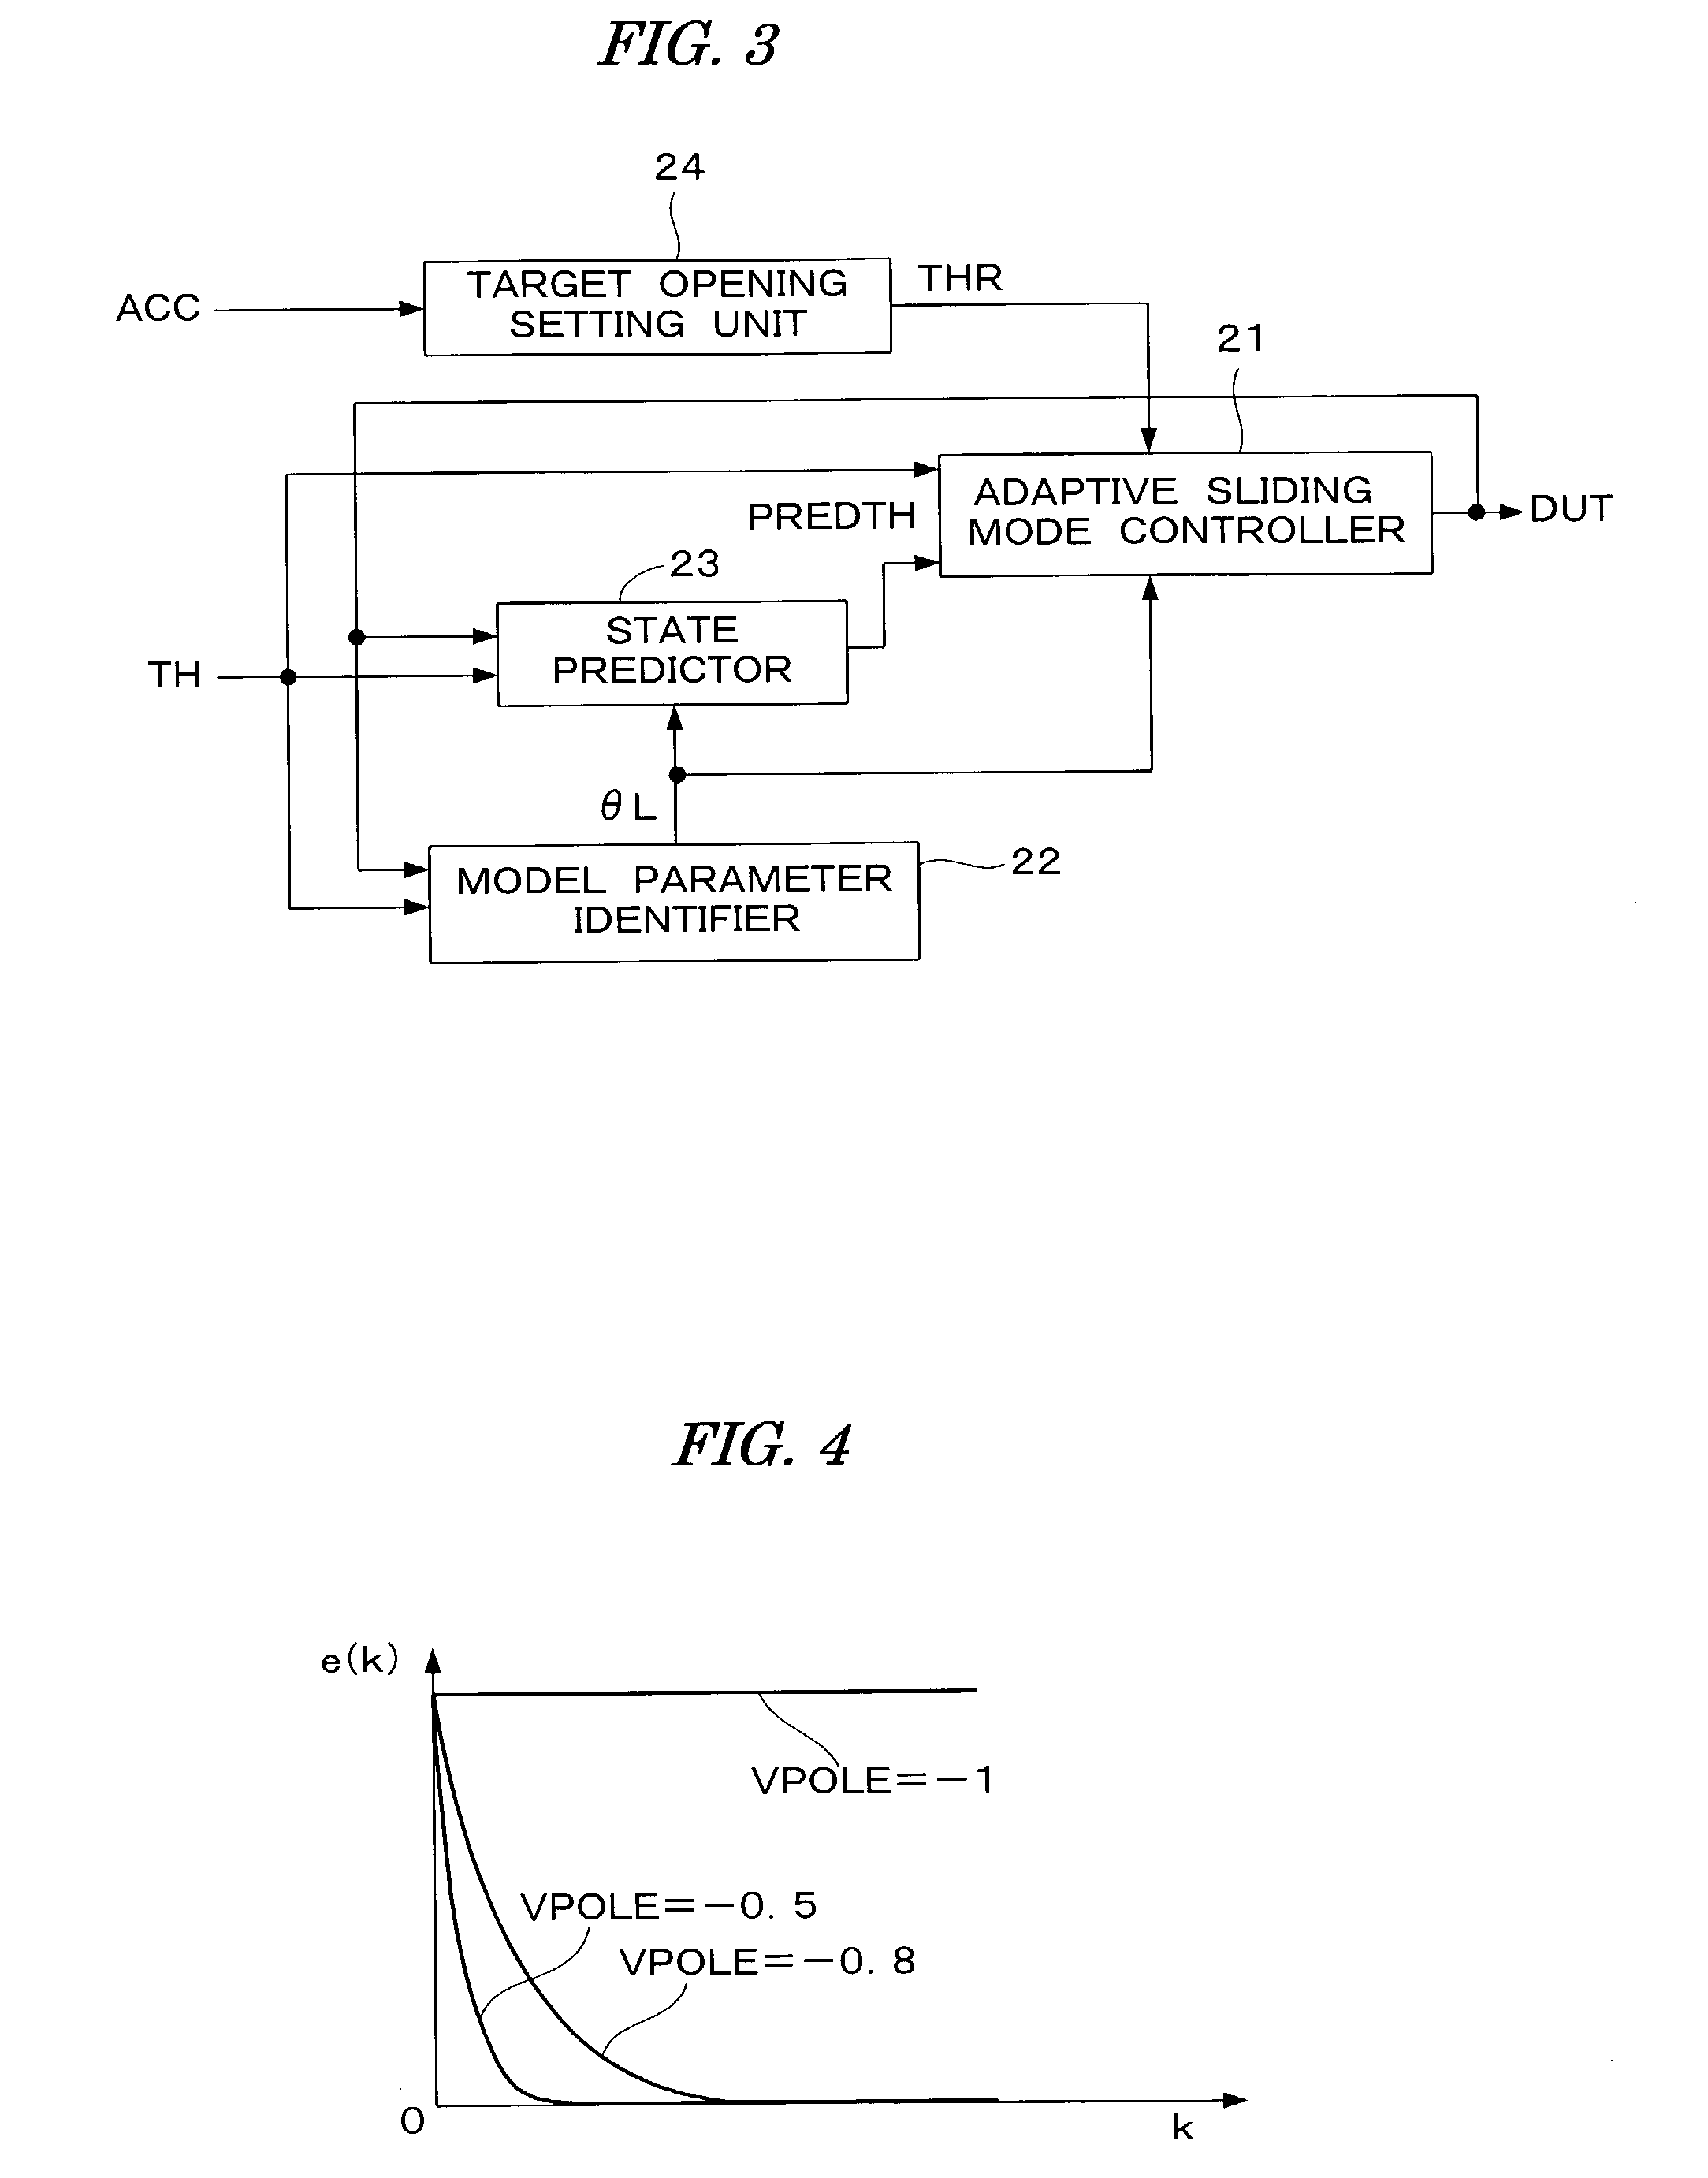 Control system for a plant using identified model parameters